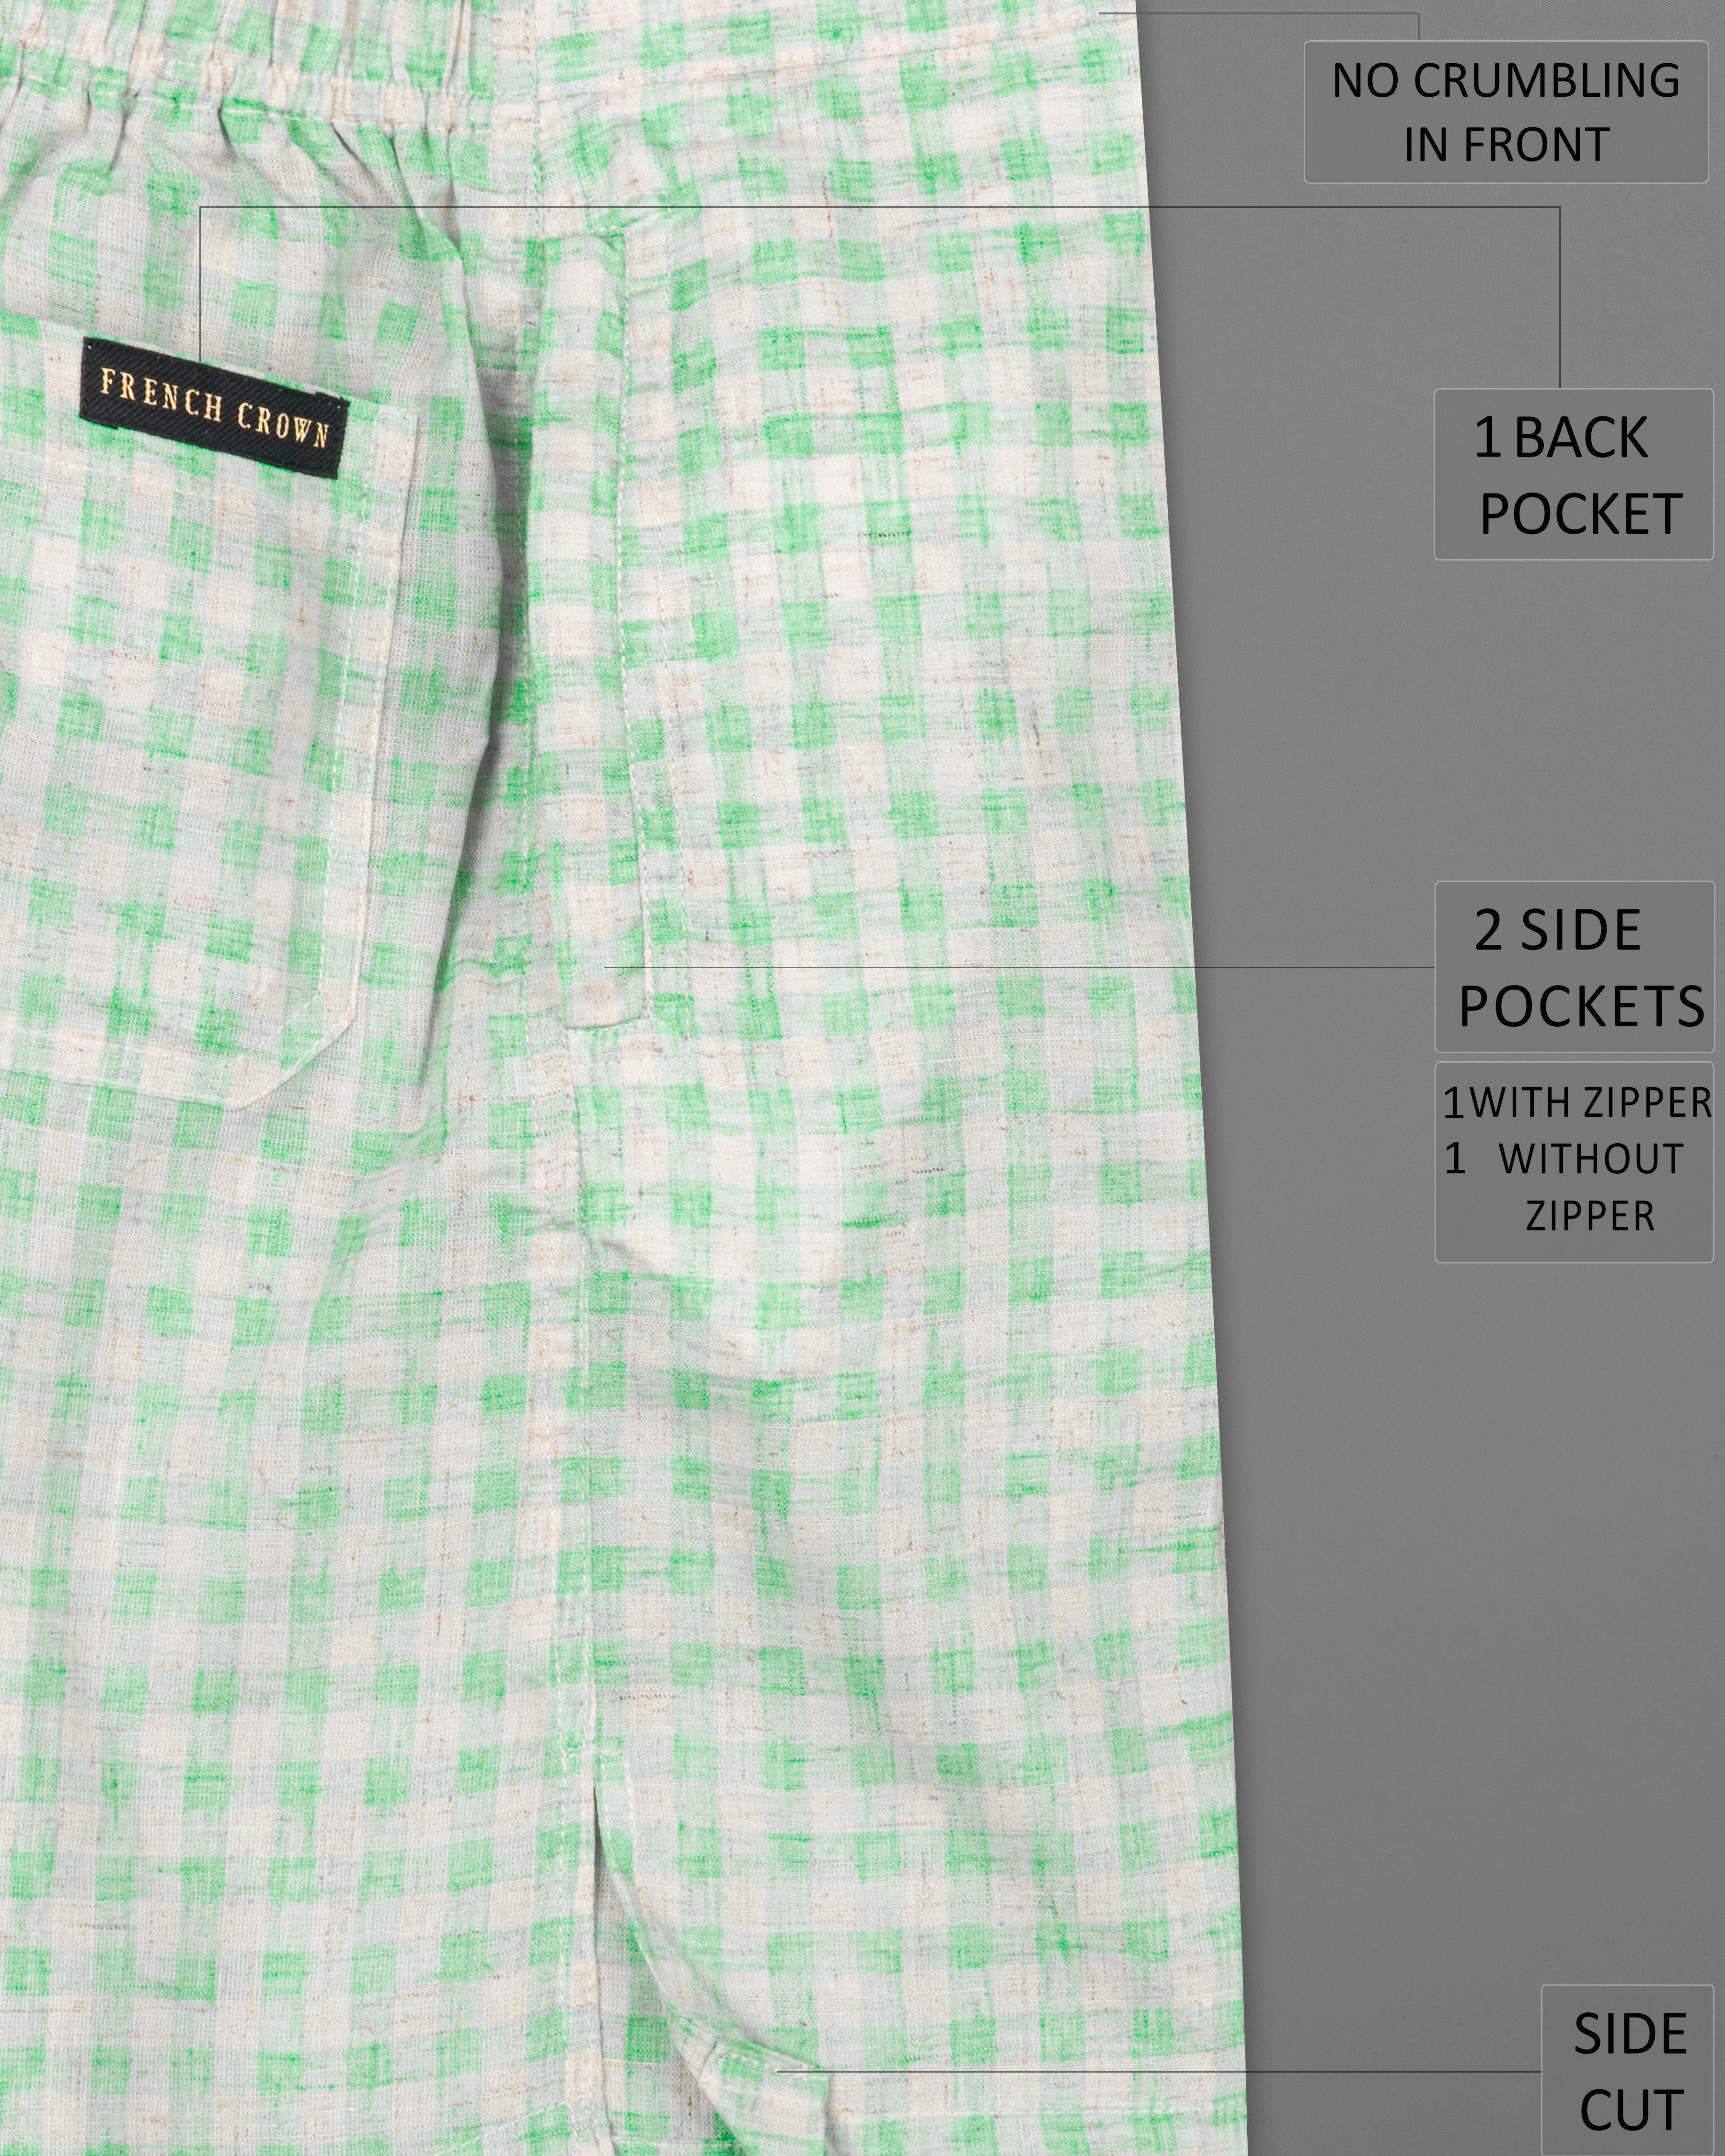 Turquoise Green and Mercury Gray Checkered Luxurious Linen Shorts SR210-28, SR210-30, SR210-32, SR210-34, SR210-36, SR210-38, SR210-40, SR210-42, SR210-44